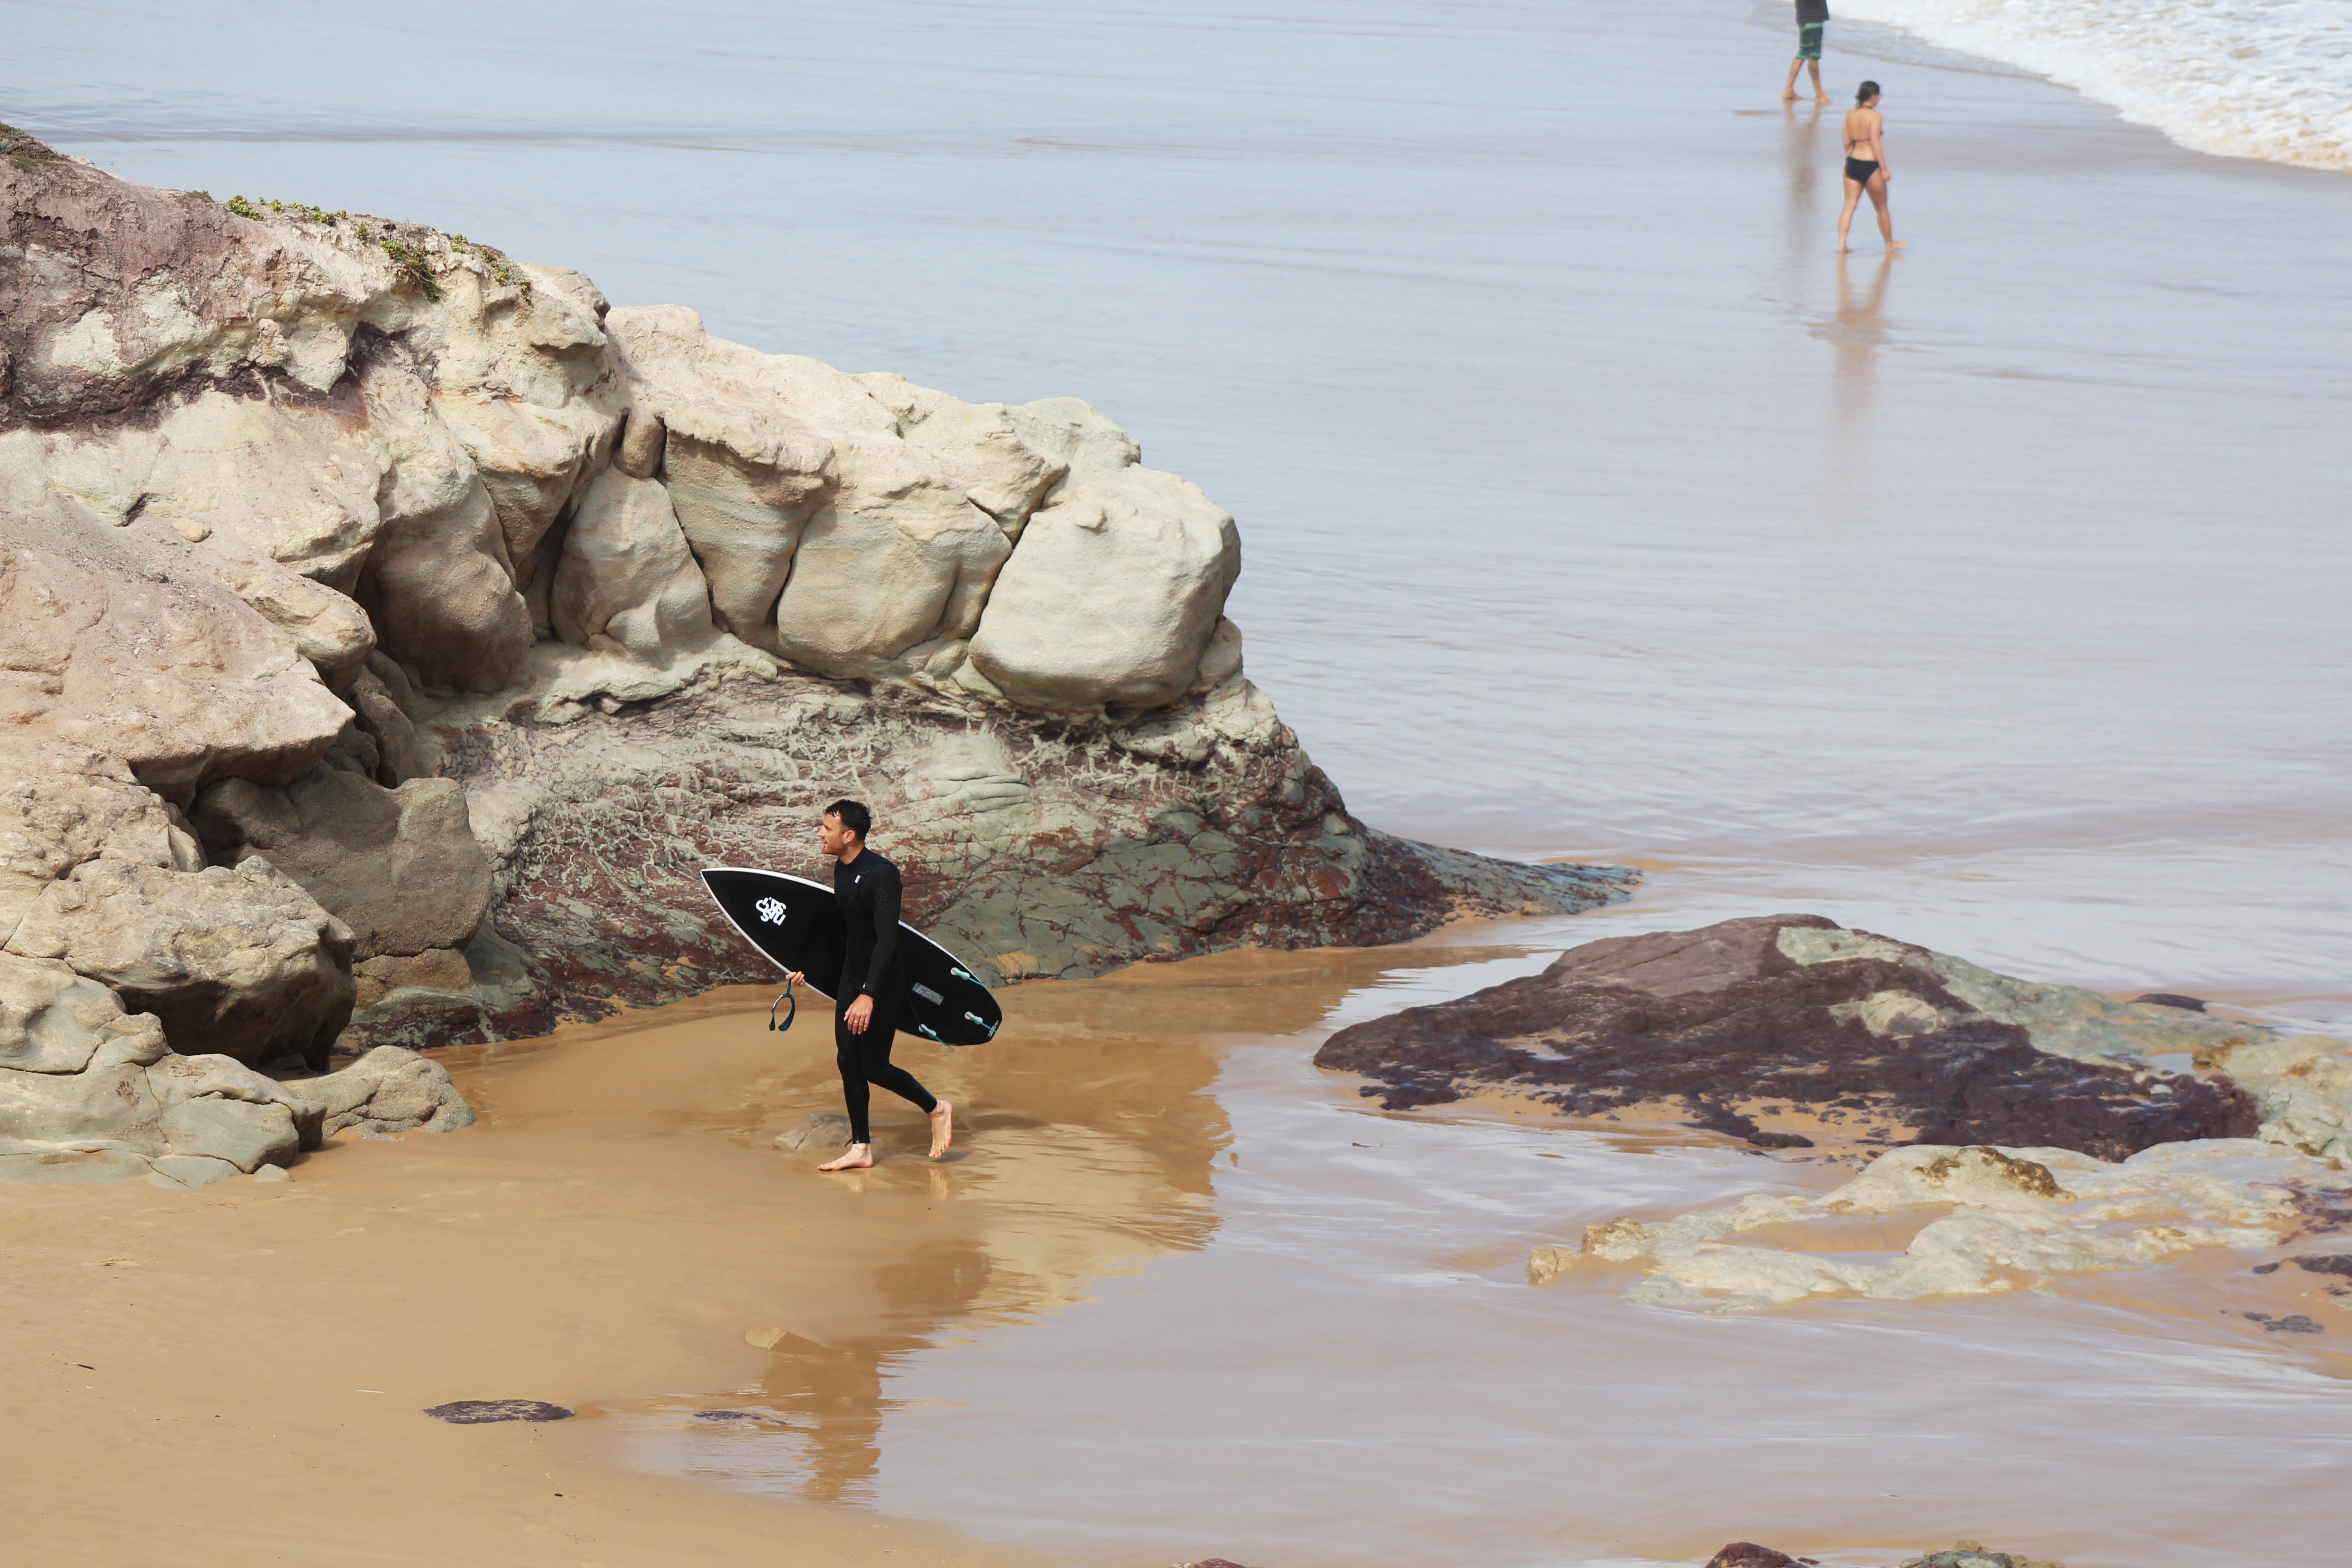 ben exits the water wearing a skins wetsuit holding a black surfboard